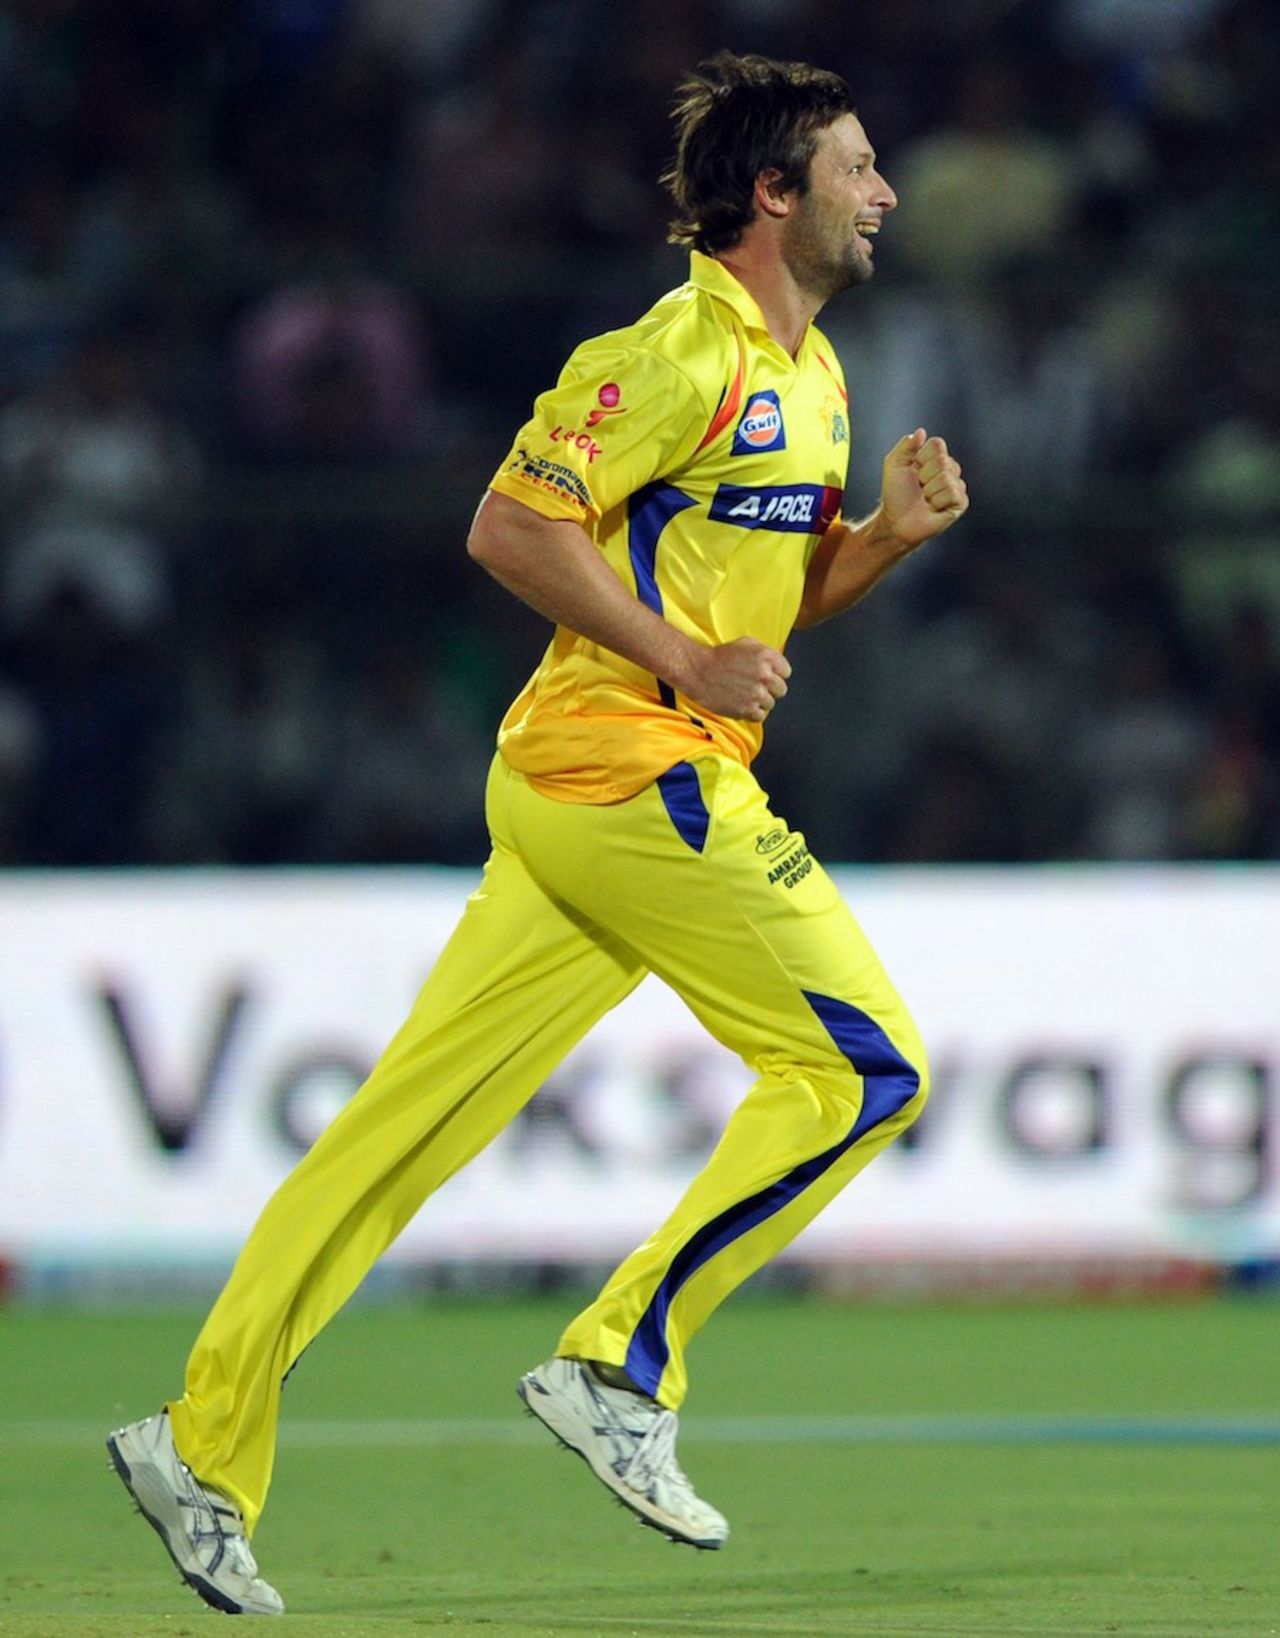 Ben Hilfenhaus took 2 for 8 in his four overs, Rajasthan Royals v Chennai Super Kings, IPL, Jaipur, May 10, 2012